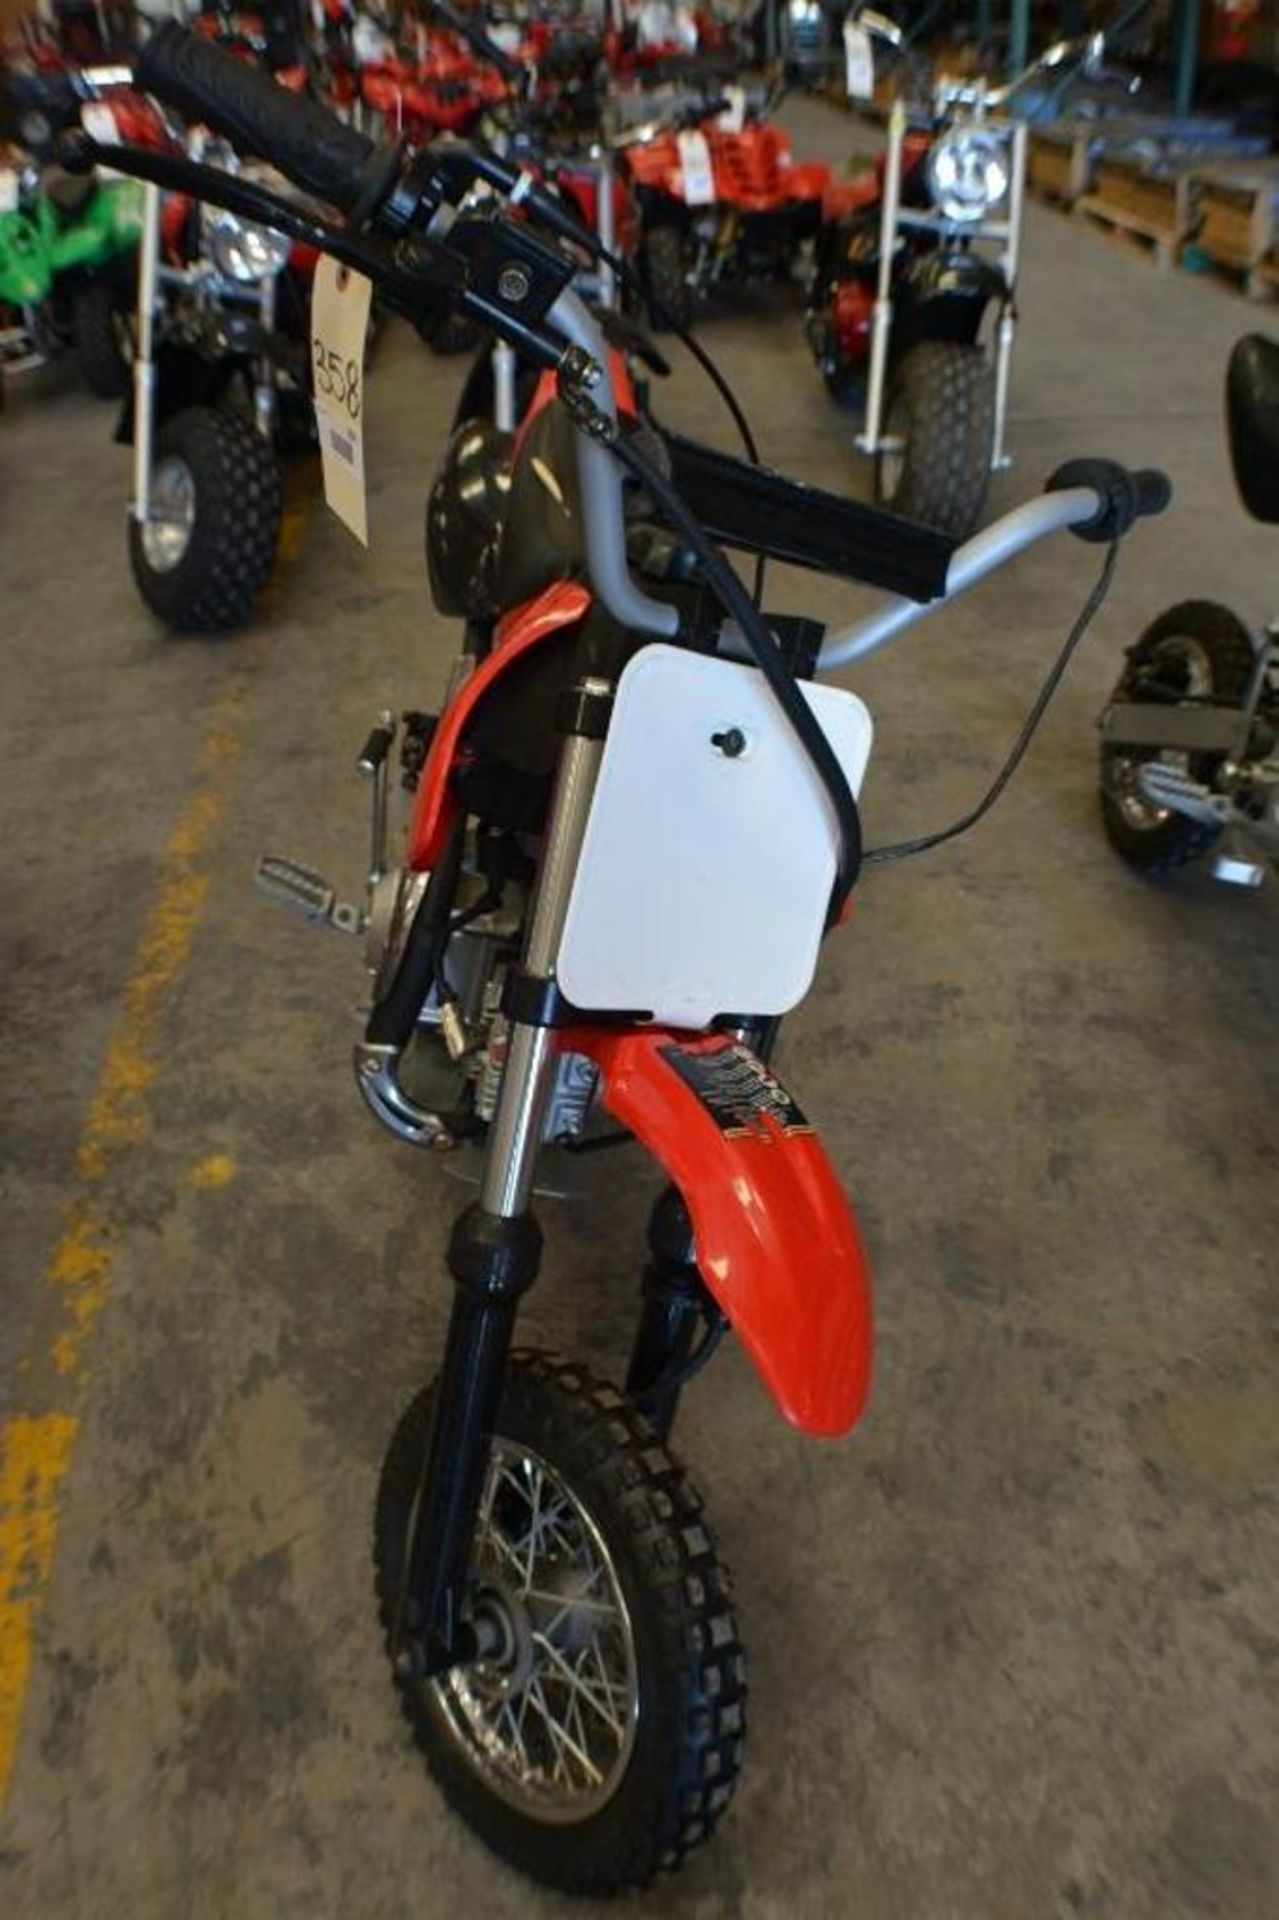 Dirt Bike 70cc 4 Stroke Red/Black Color. This unit is for EXPORT ONLY. Buyers acknowledges purchase